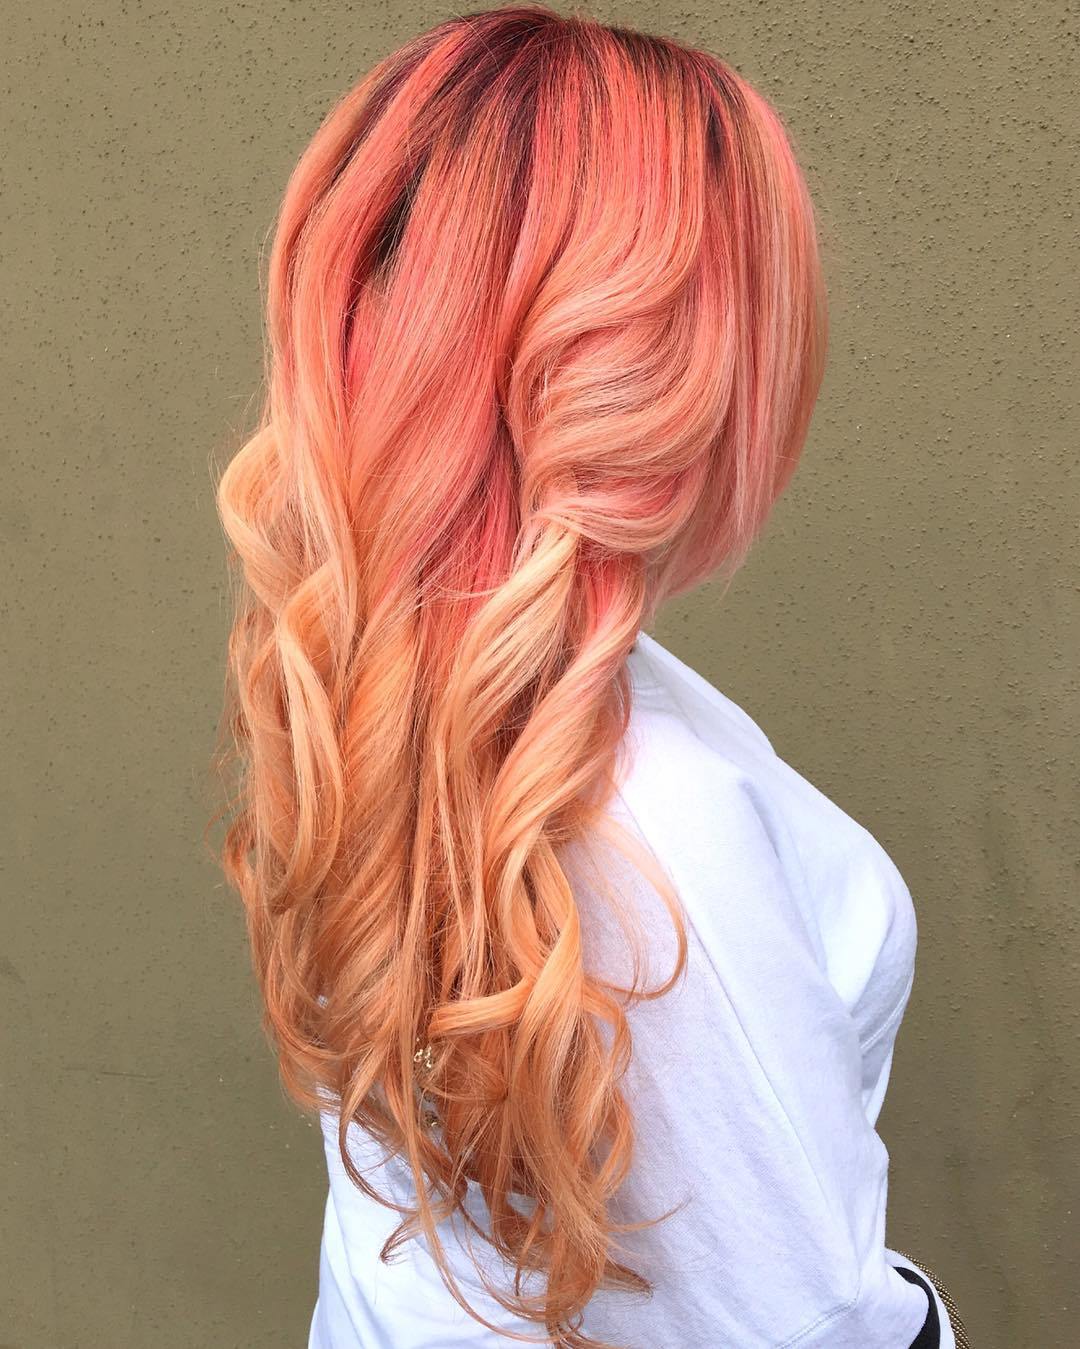 Ombre Hair Blonde